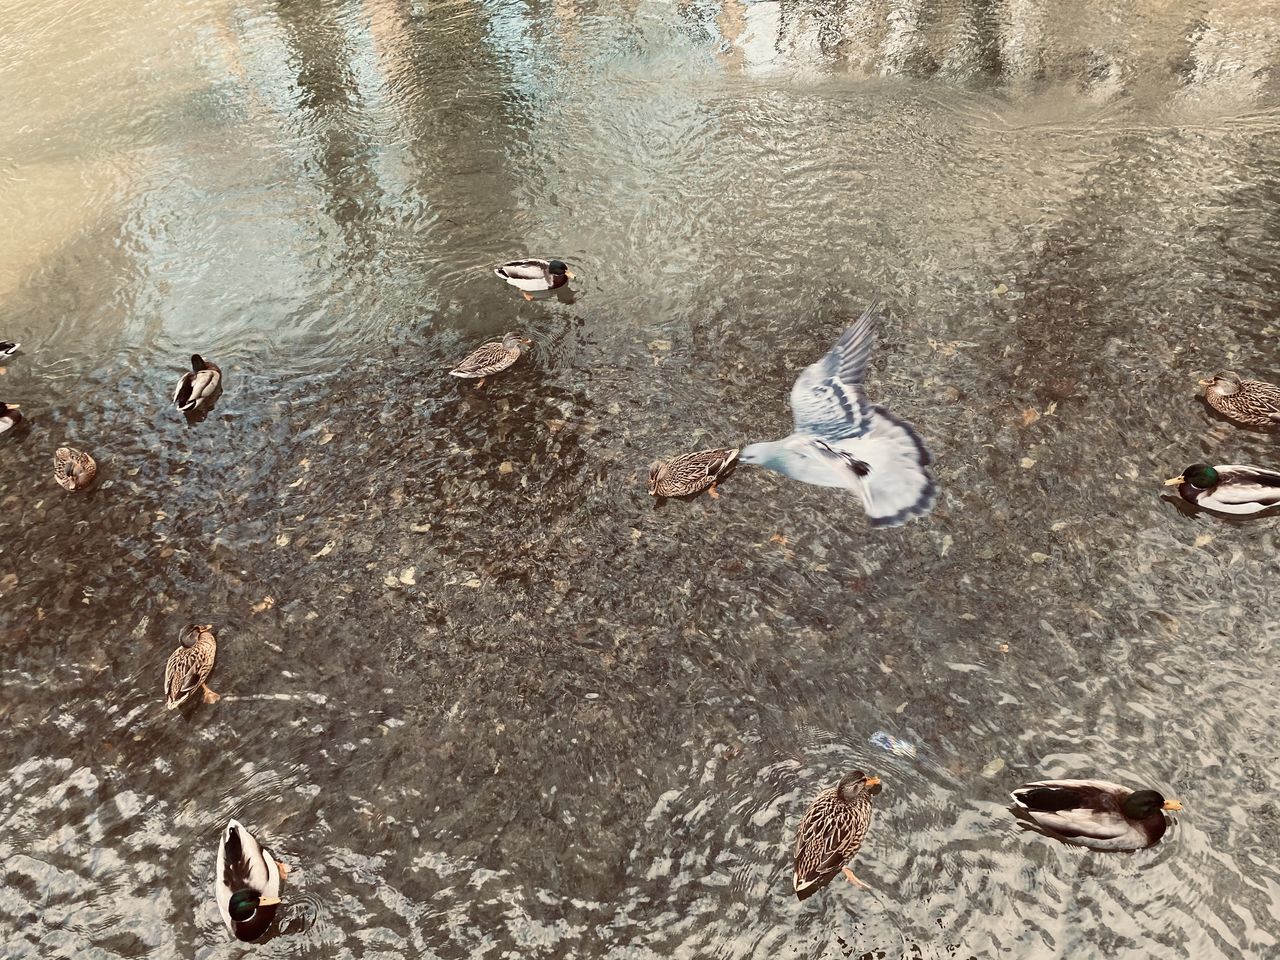 water, high angle view, day, no people, nature, beach, animal, wet, duck, animal themes, land, outdoors, animal wildlife, water bird, group of animals, sand, bird, wildlife, reflection, lake